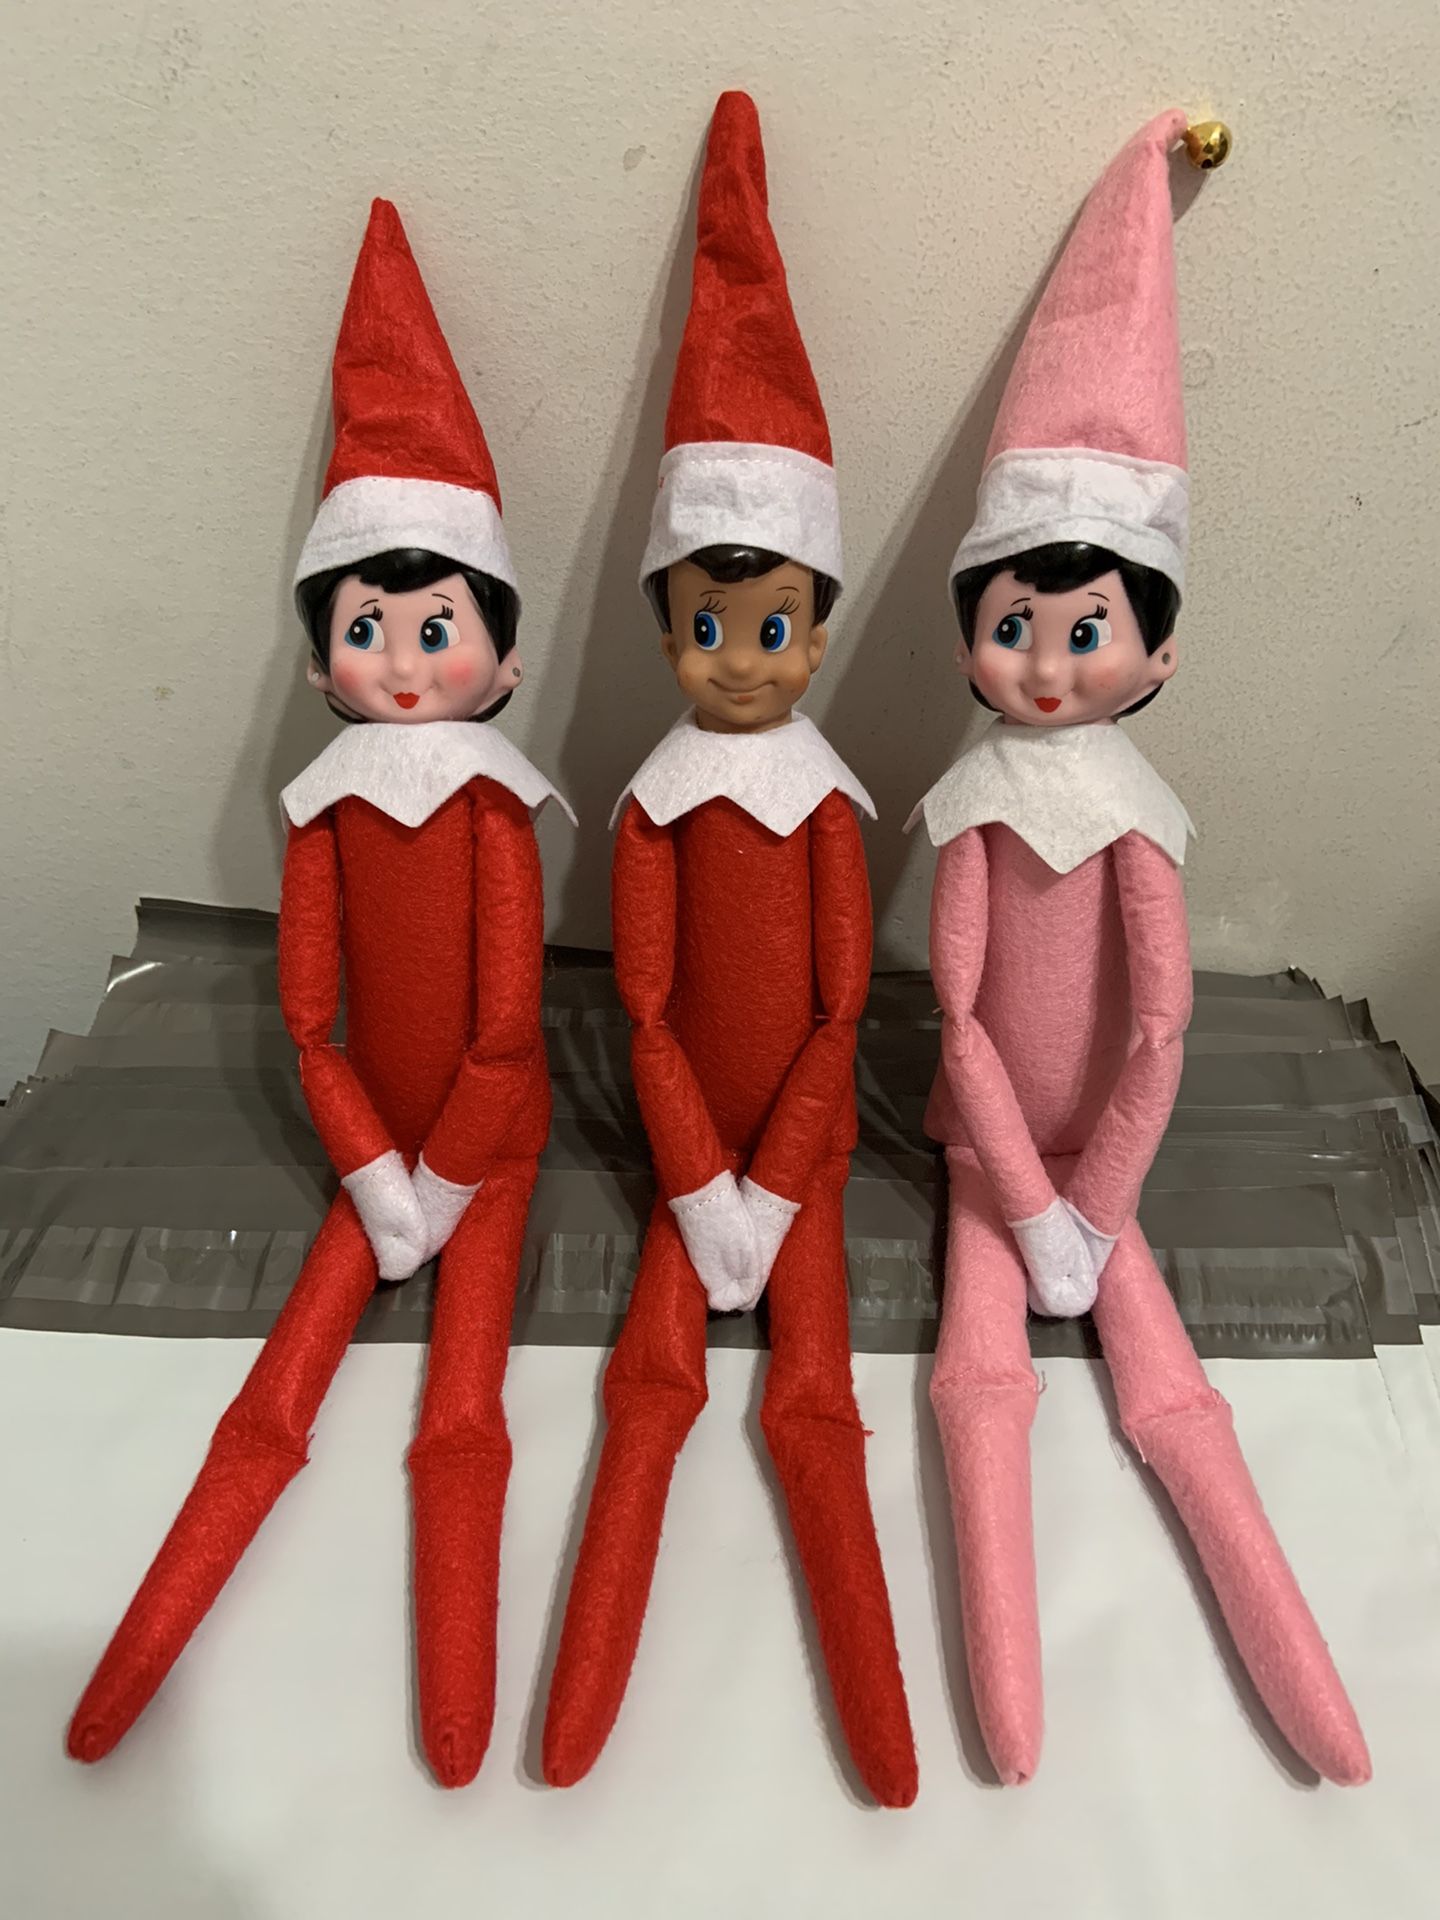 New Elf on the shelf 1 Red Girl, 1 Red Boy, and 1 Pink Girl Dolls Plush Set High Quality Great Christmas Gift